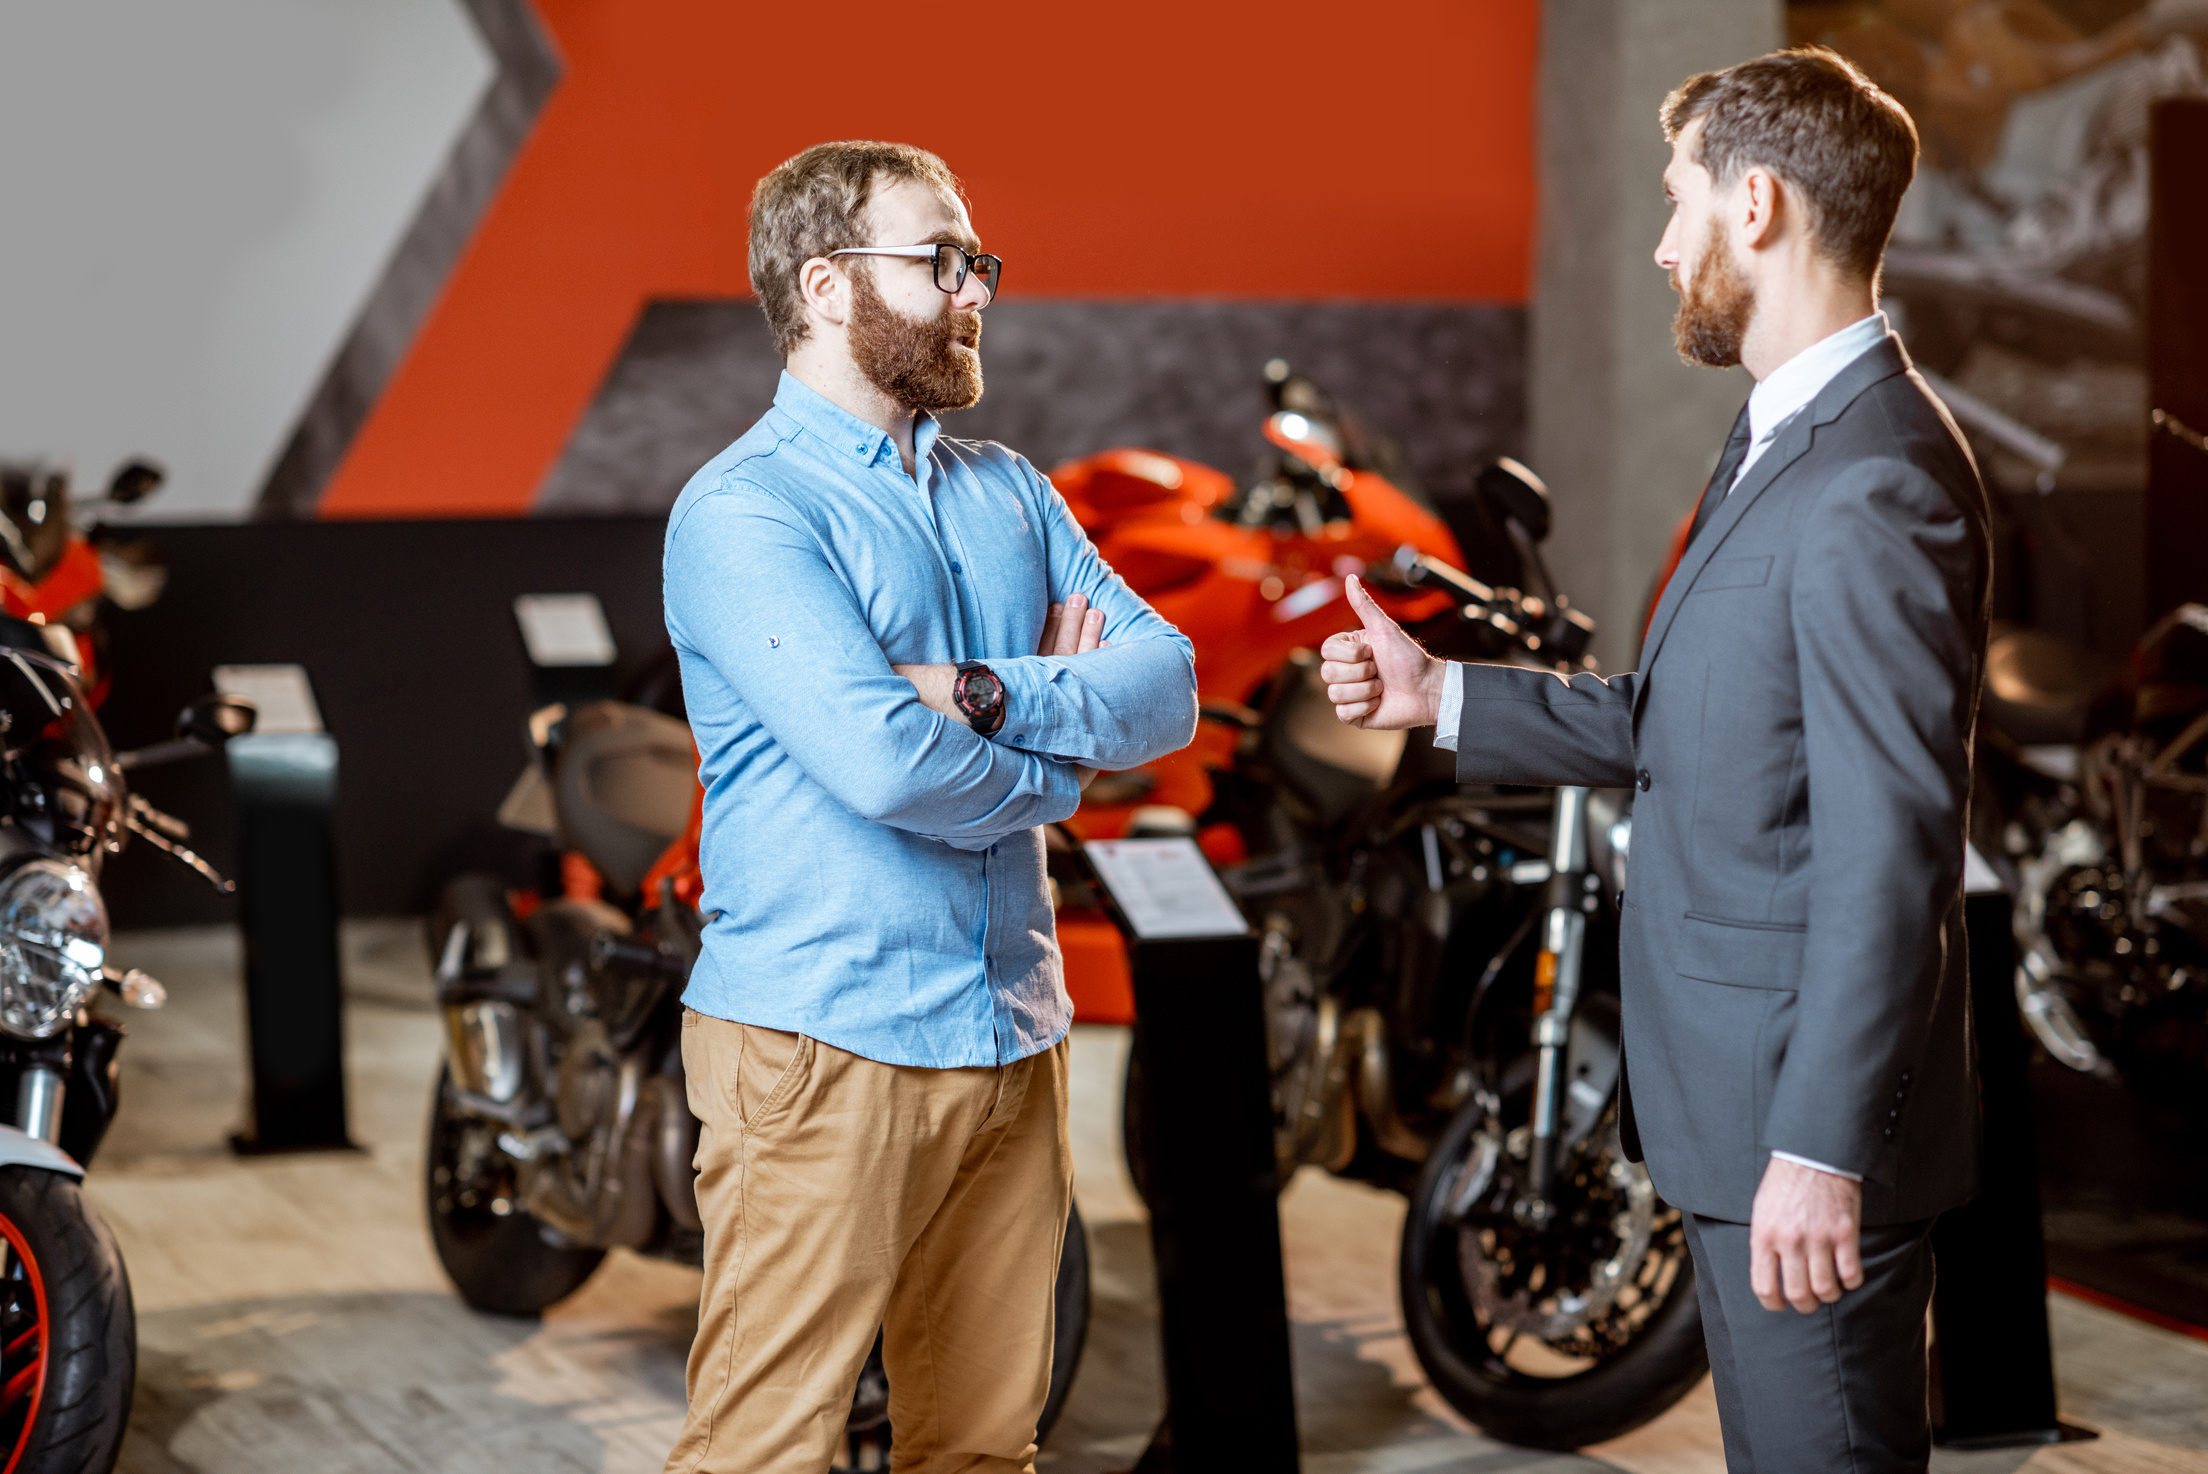 Sales Consultant with a Client in the Showroom with Motorcycles